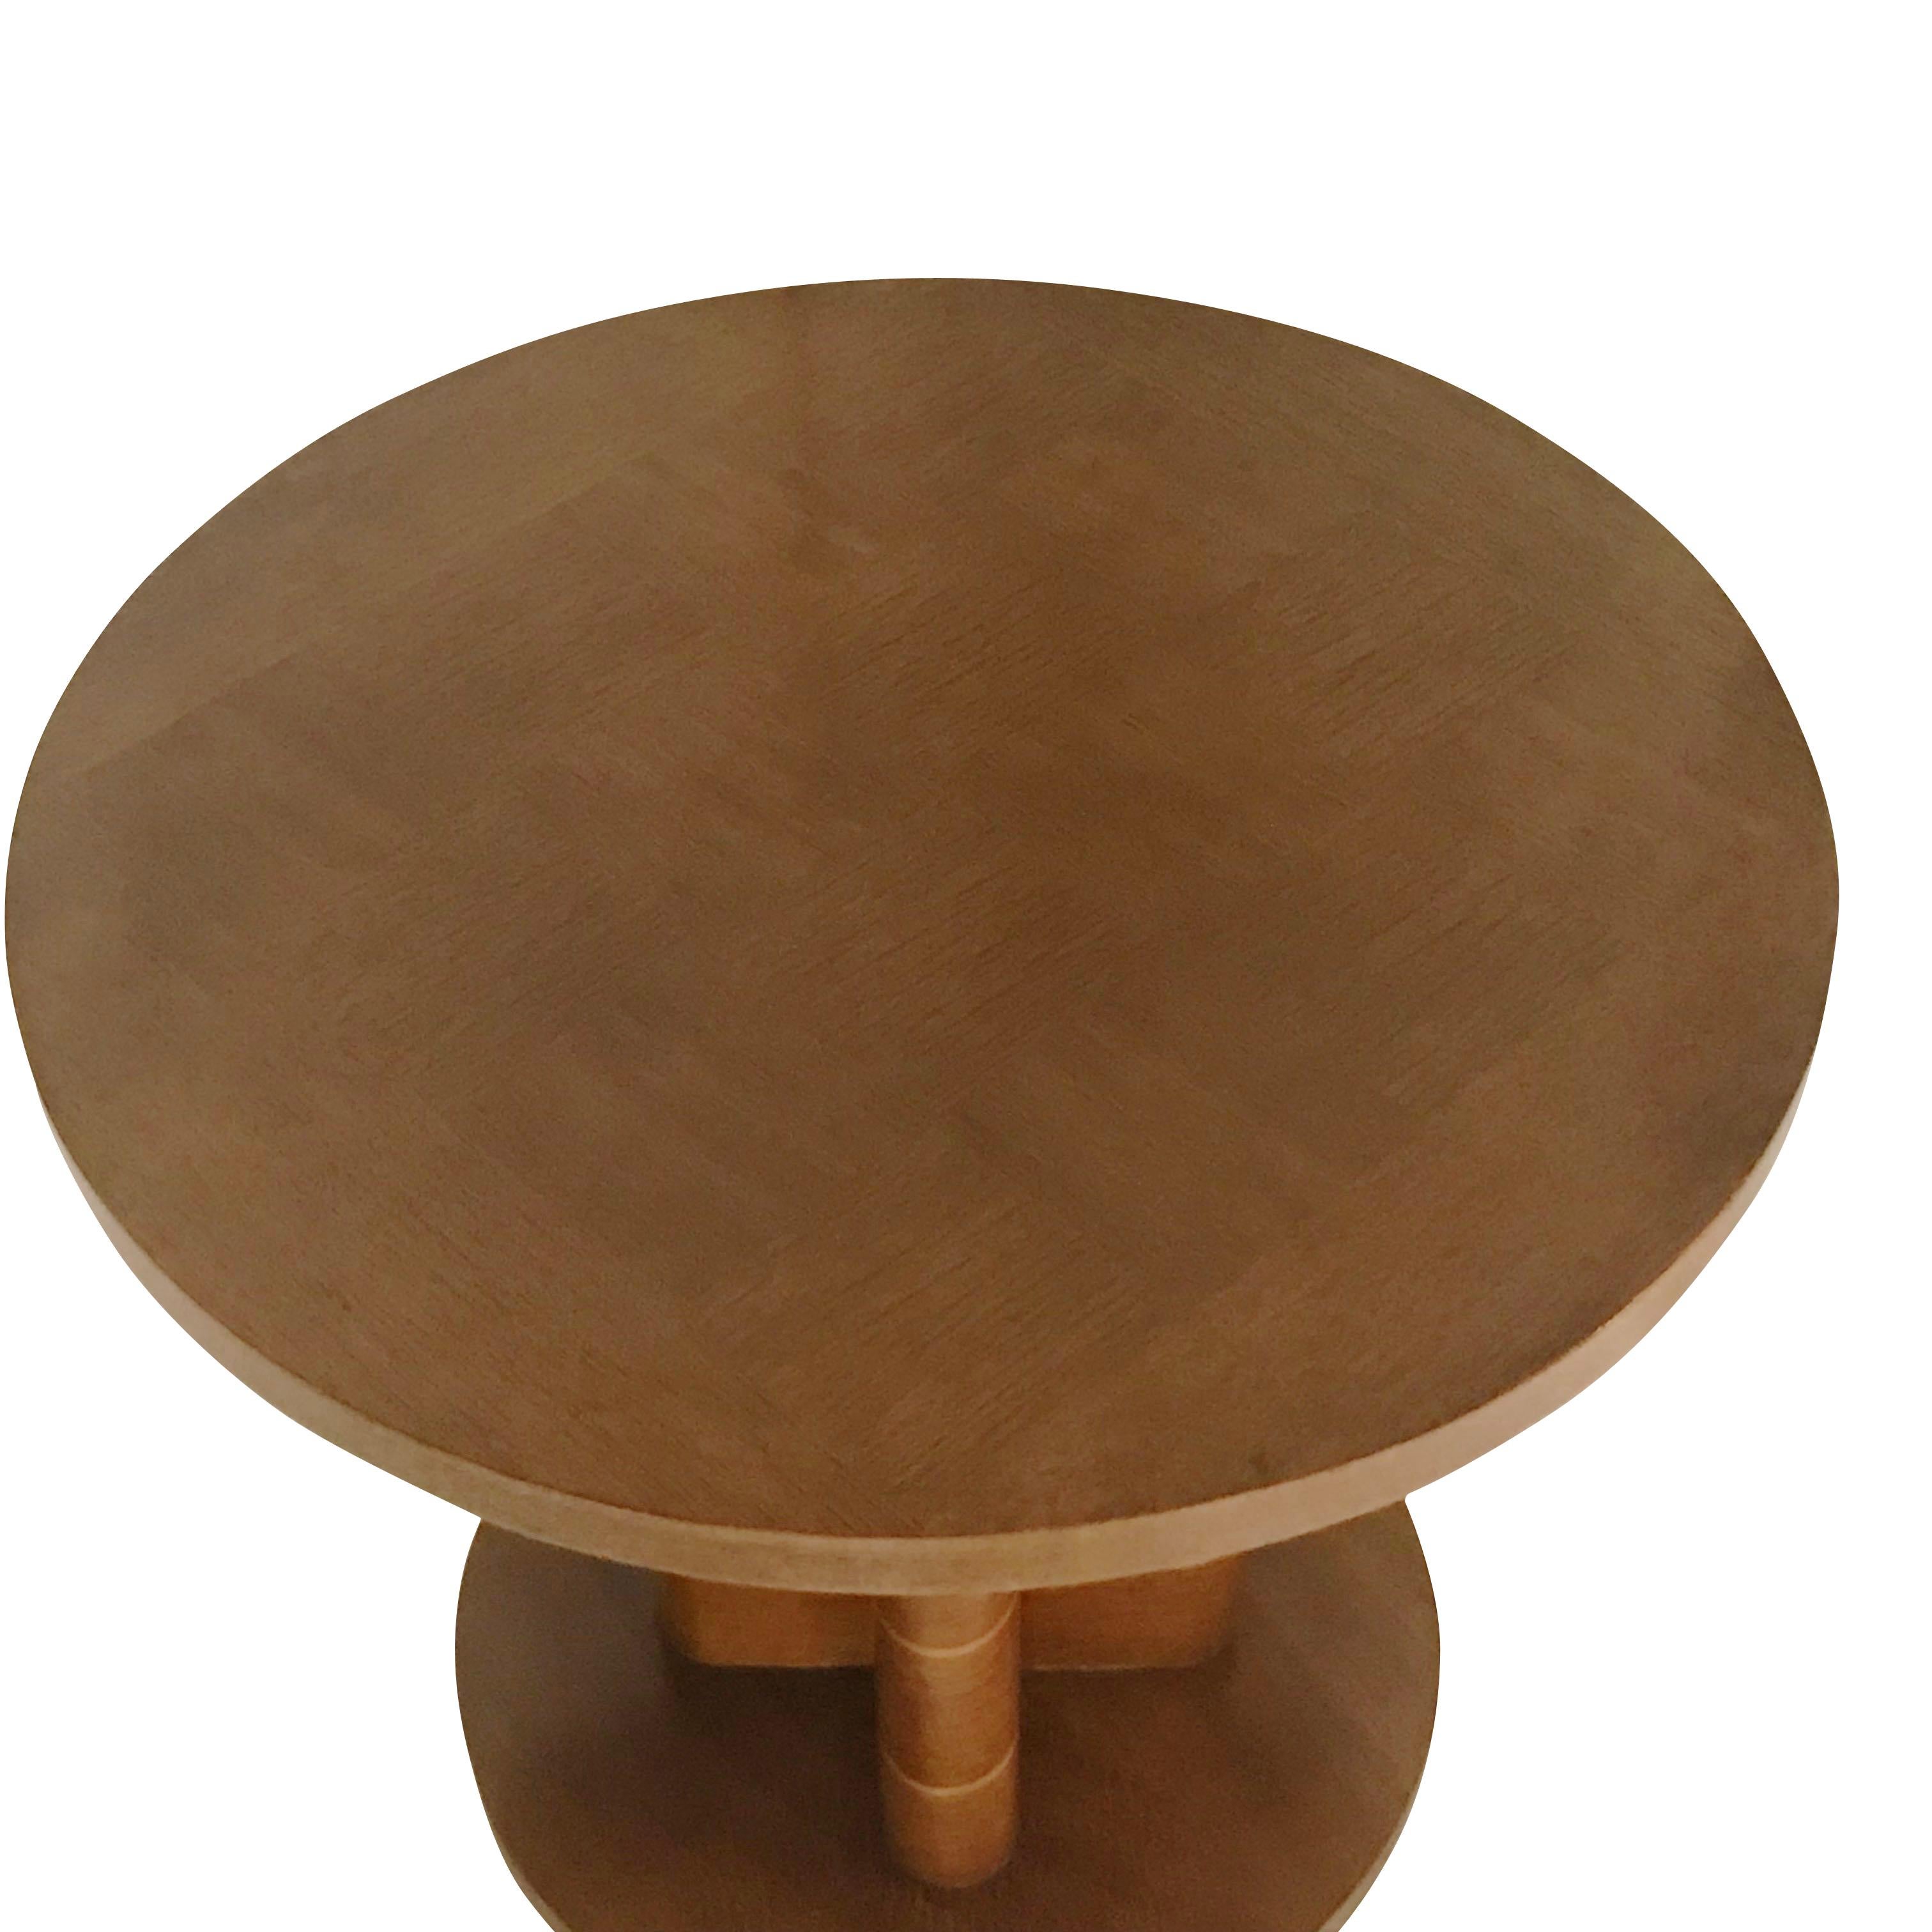 Midcentury French round parquet design oak top with quatrefoil shape base side table.
Newly refinished.
 